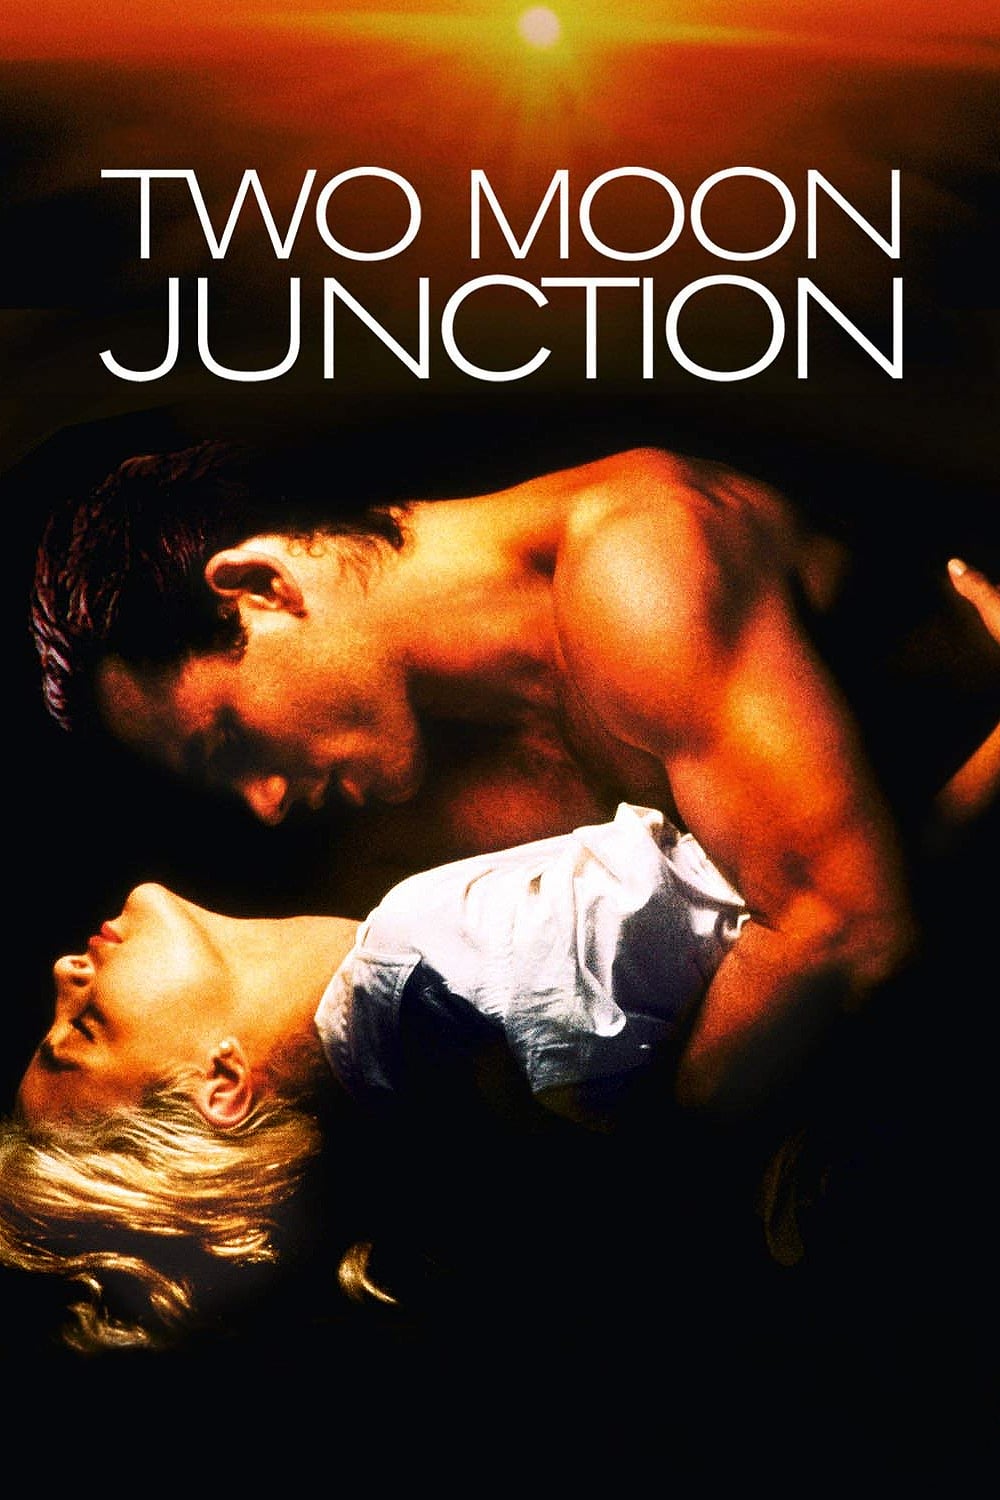 Two moon junction video